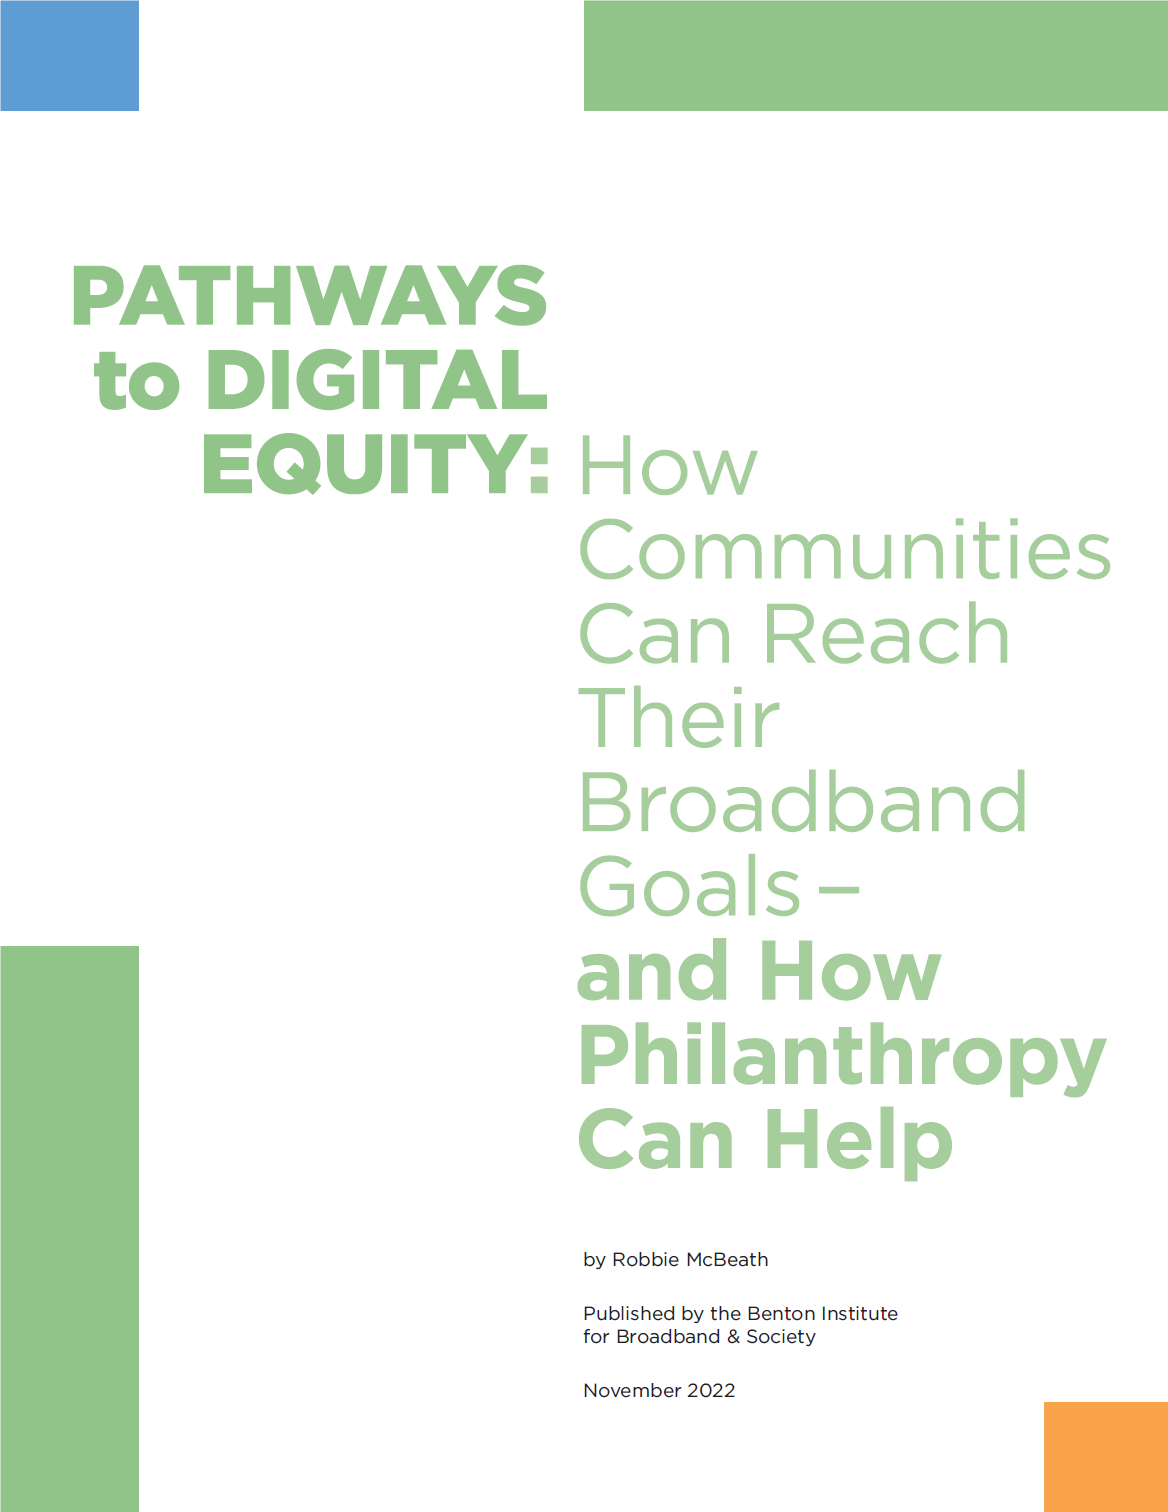 Pathways to Digital Equity: How Communities Can Reach Their Broadband Goals—and How Philanthropy Can Help